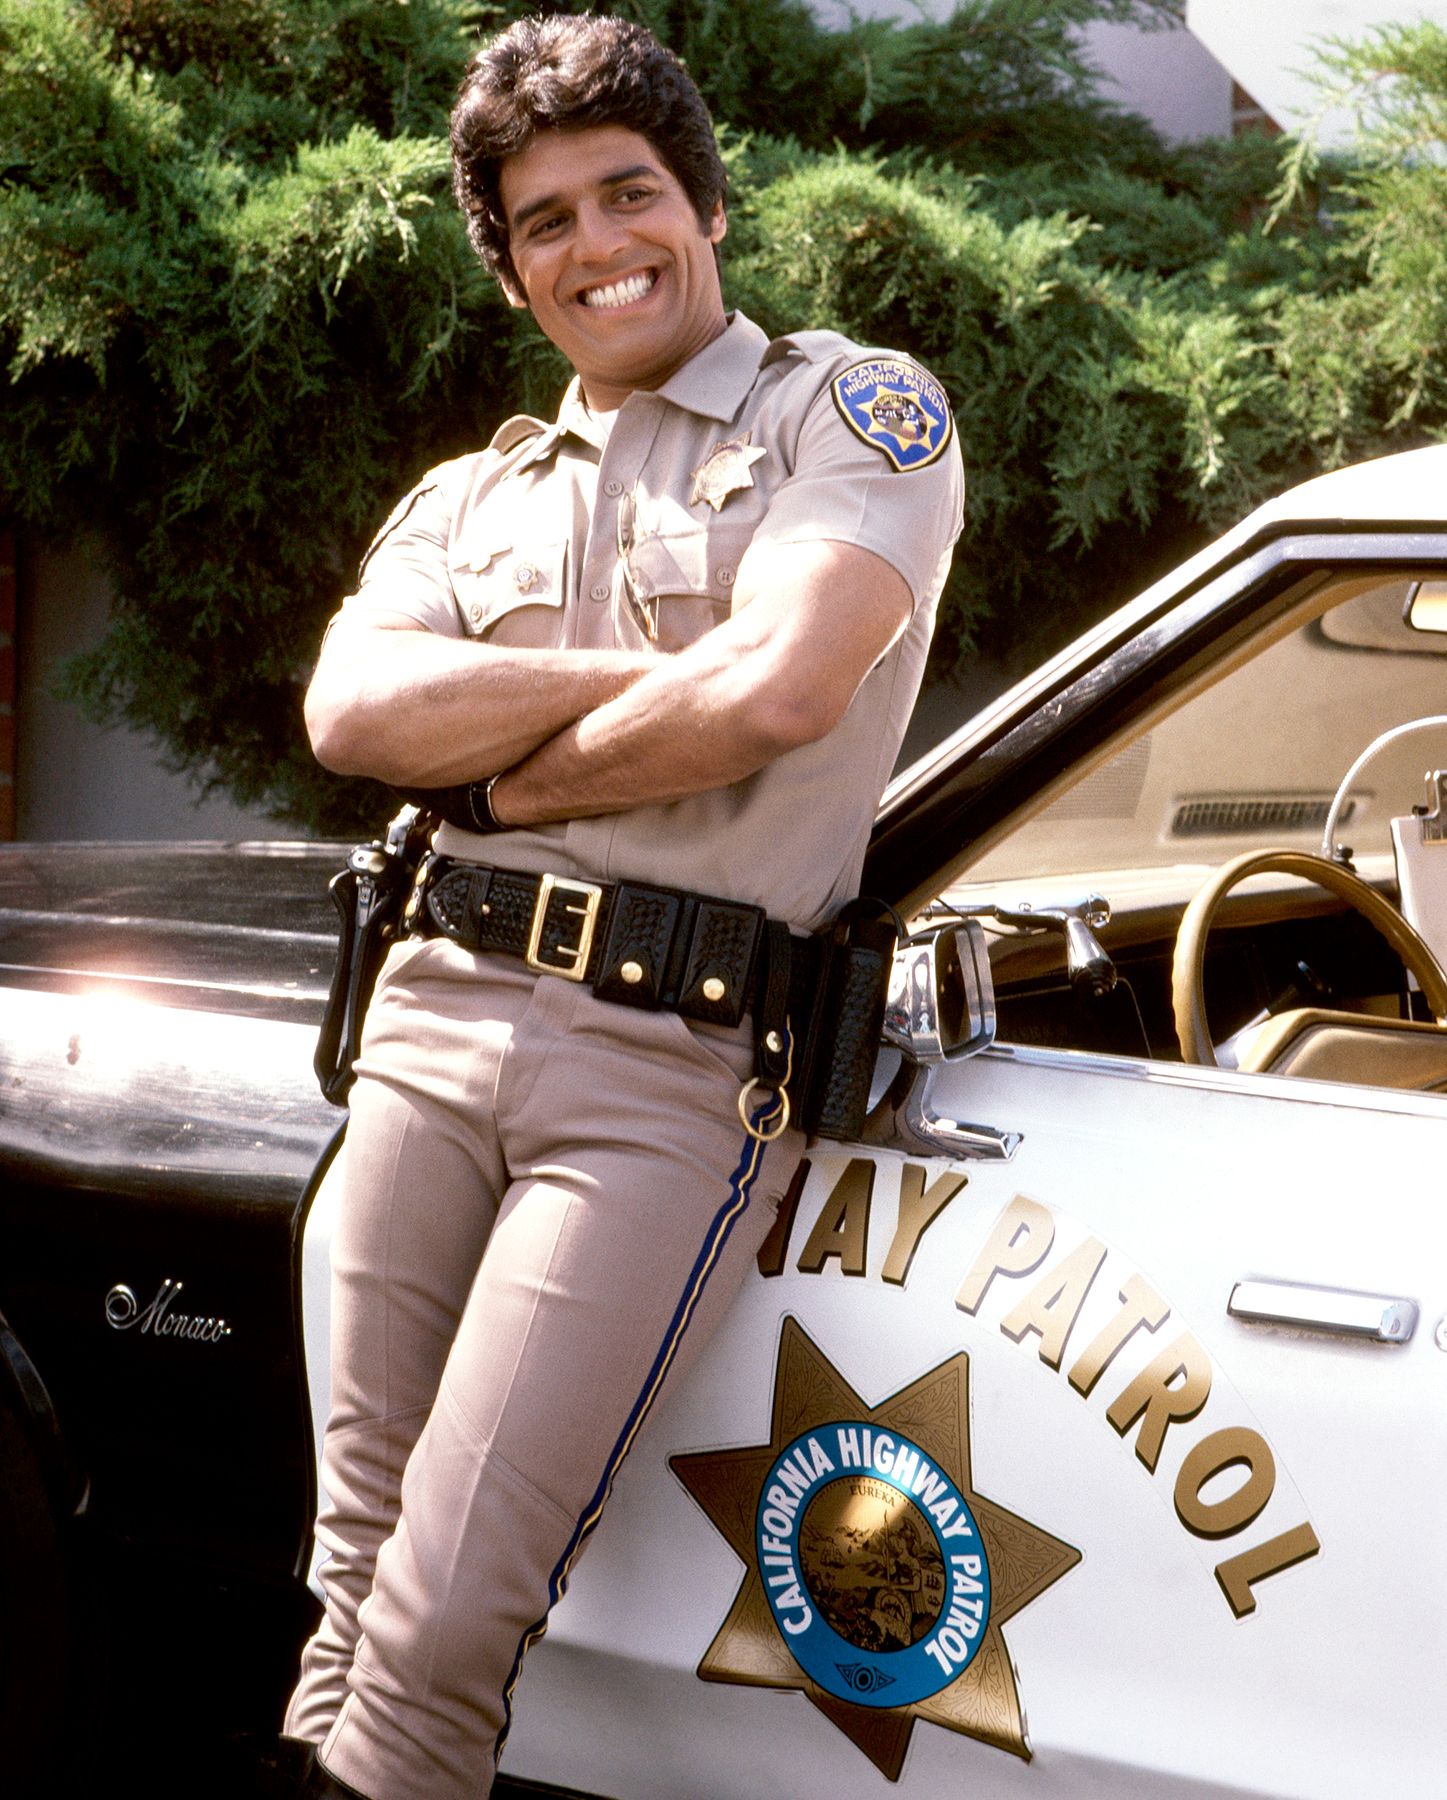 CHiPs' Alum Erik Estrada Is A Real Life Police Officer Now!